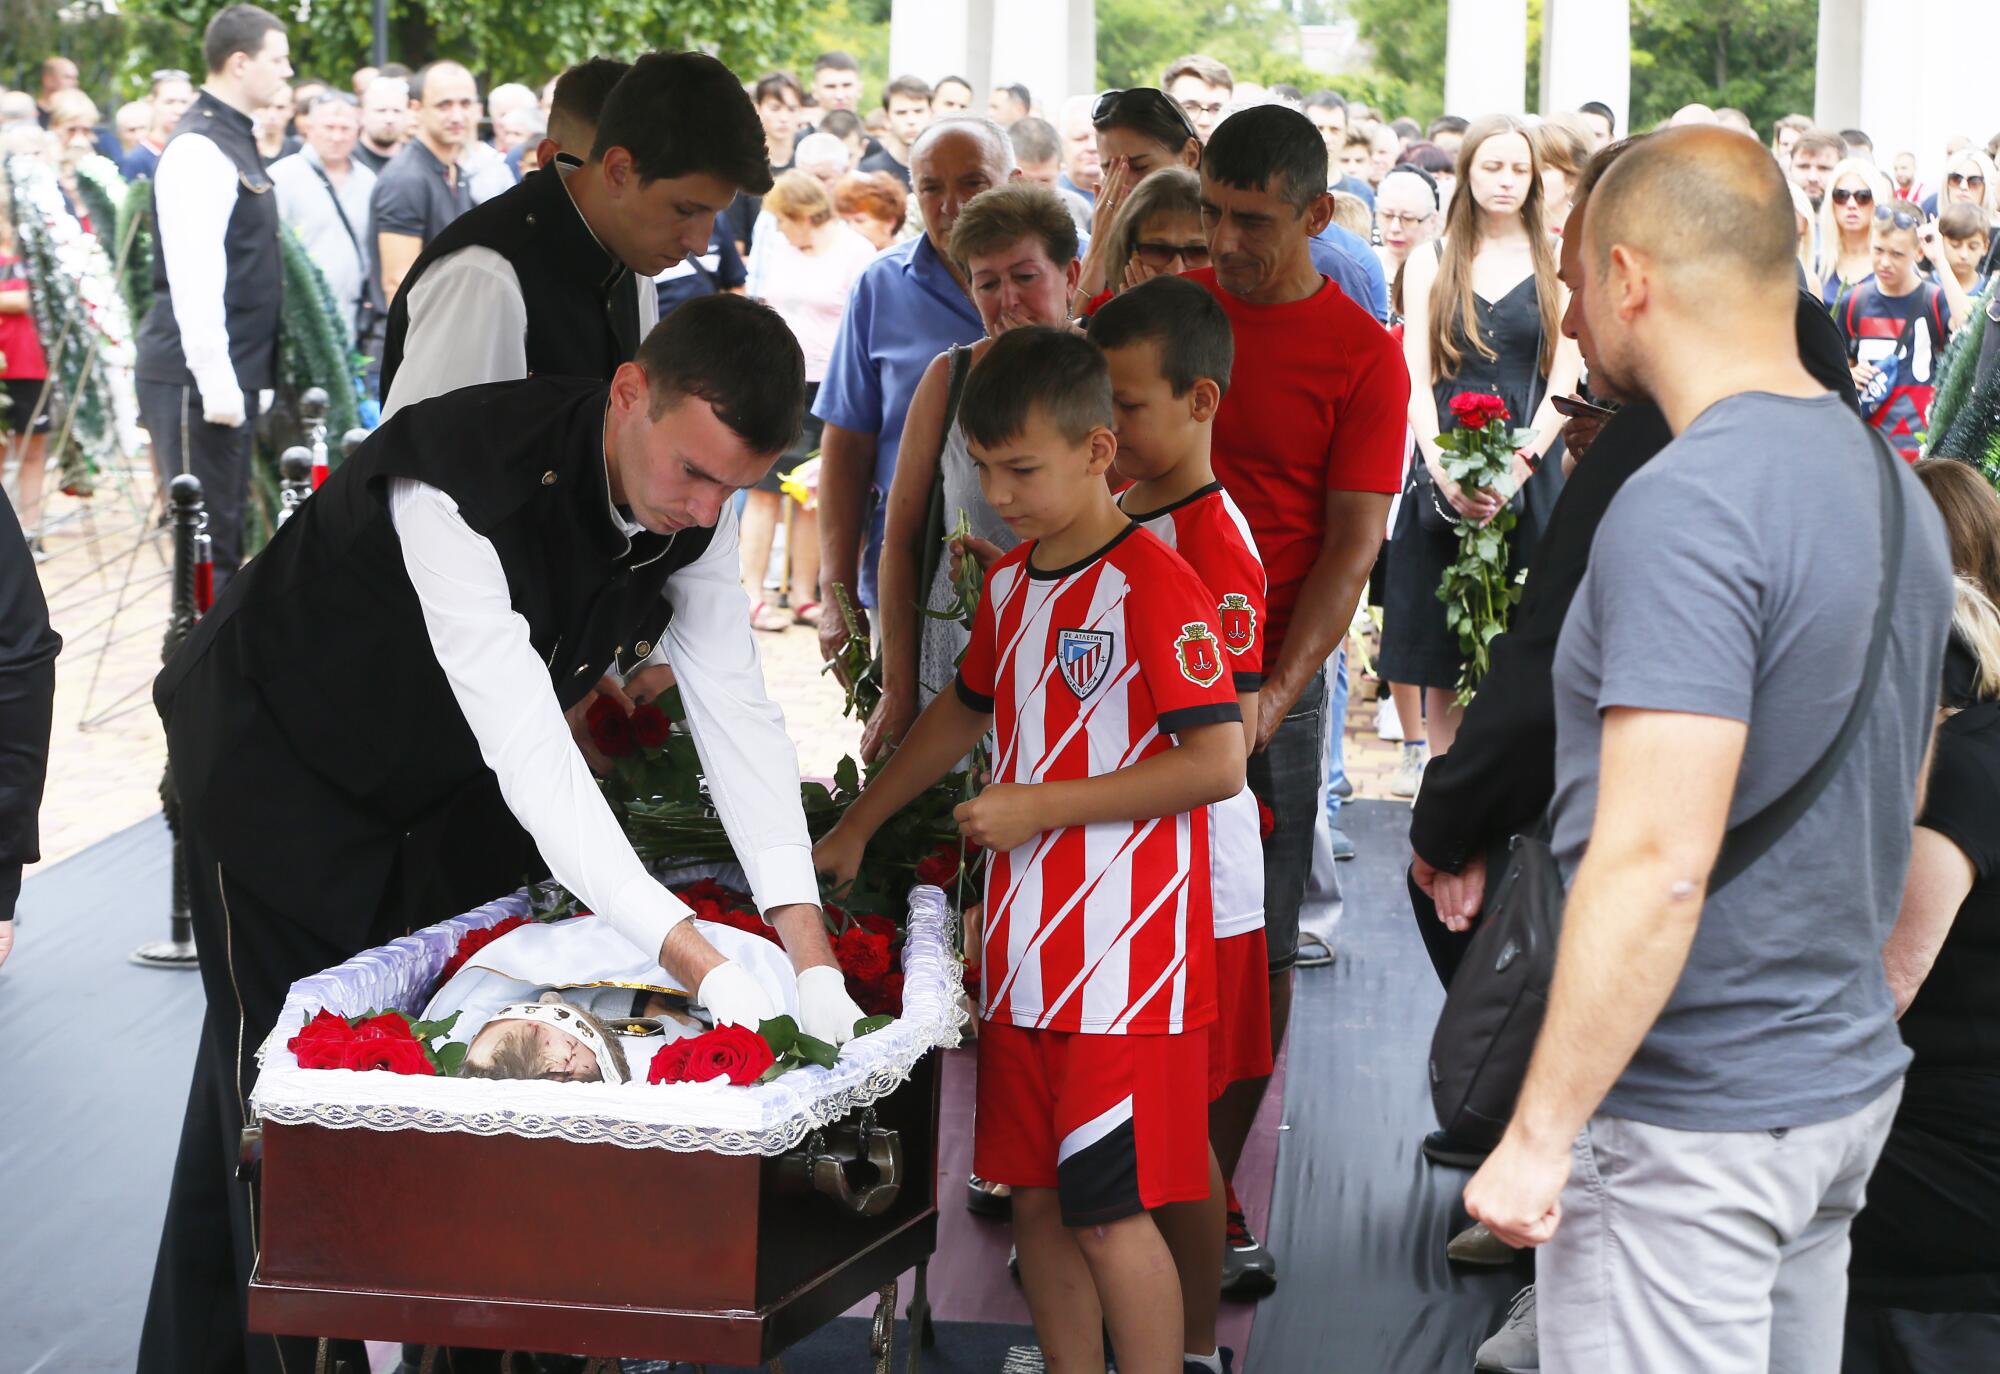 Friends, some wearing soccer jerseys, look at man in coffin.